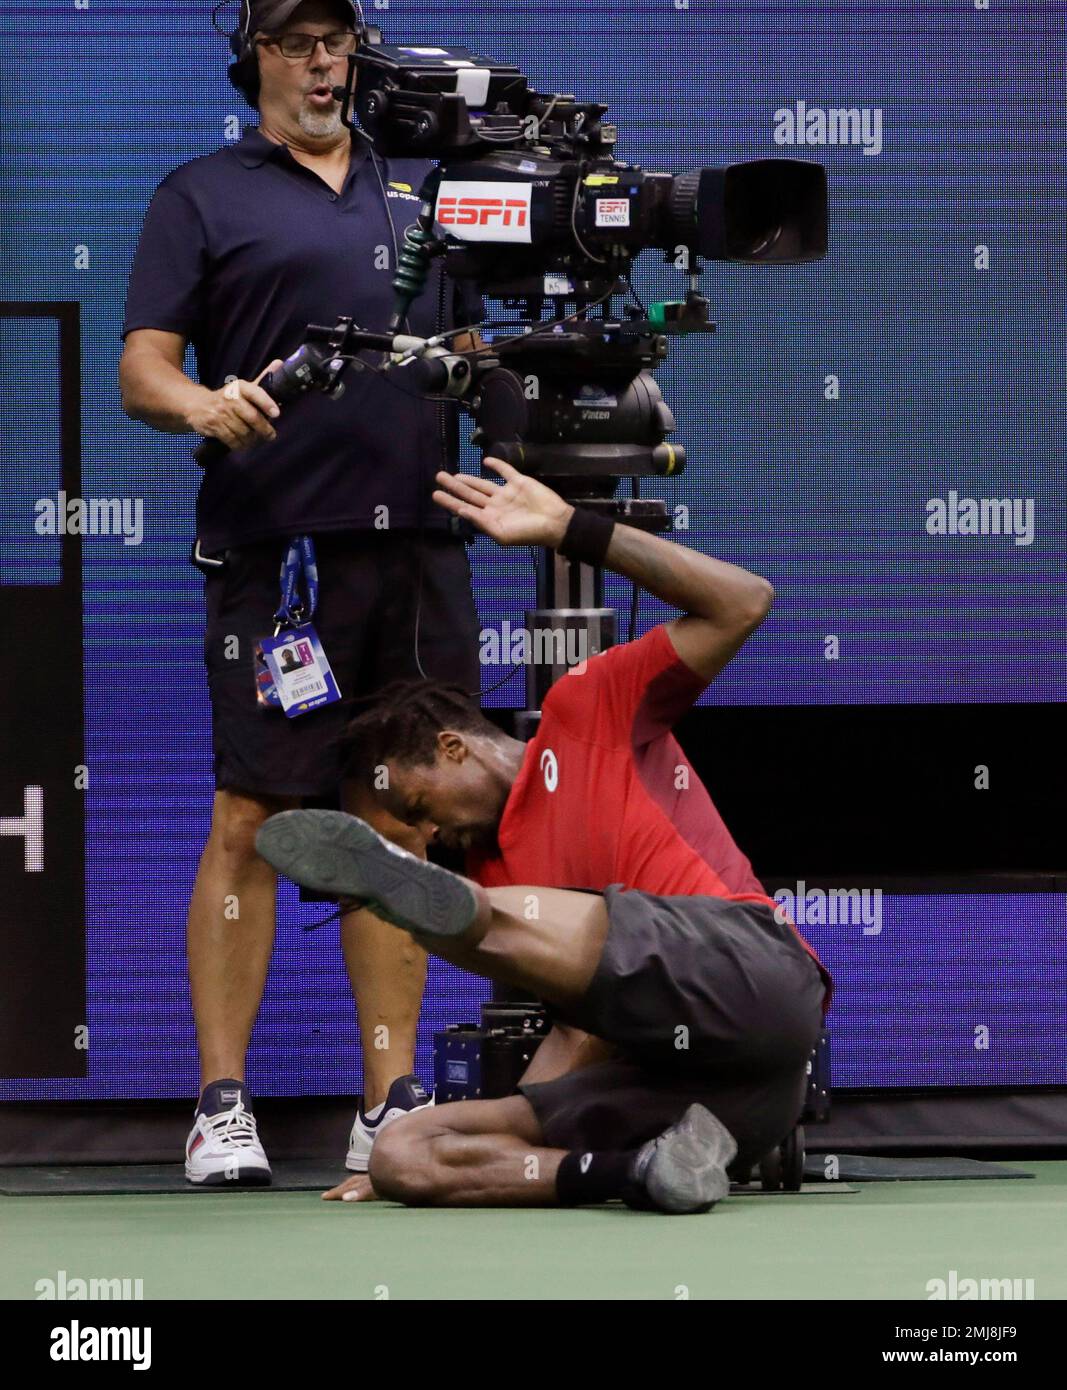 Gael Monfils, of France, nearly runs into a television cameraman while returning a shot from Matteo Berrettini, of Italy, during the quarterfinals of the U.S